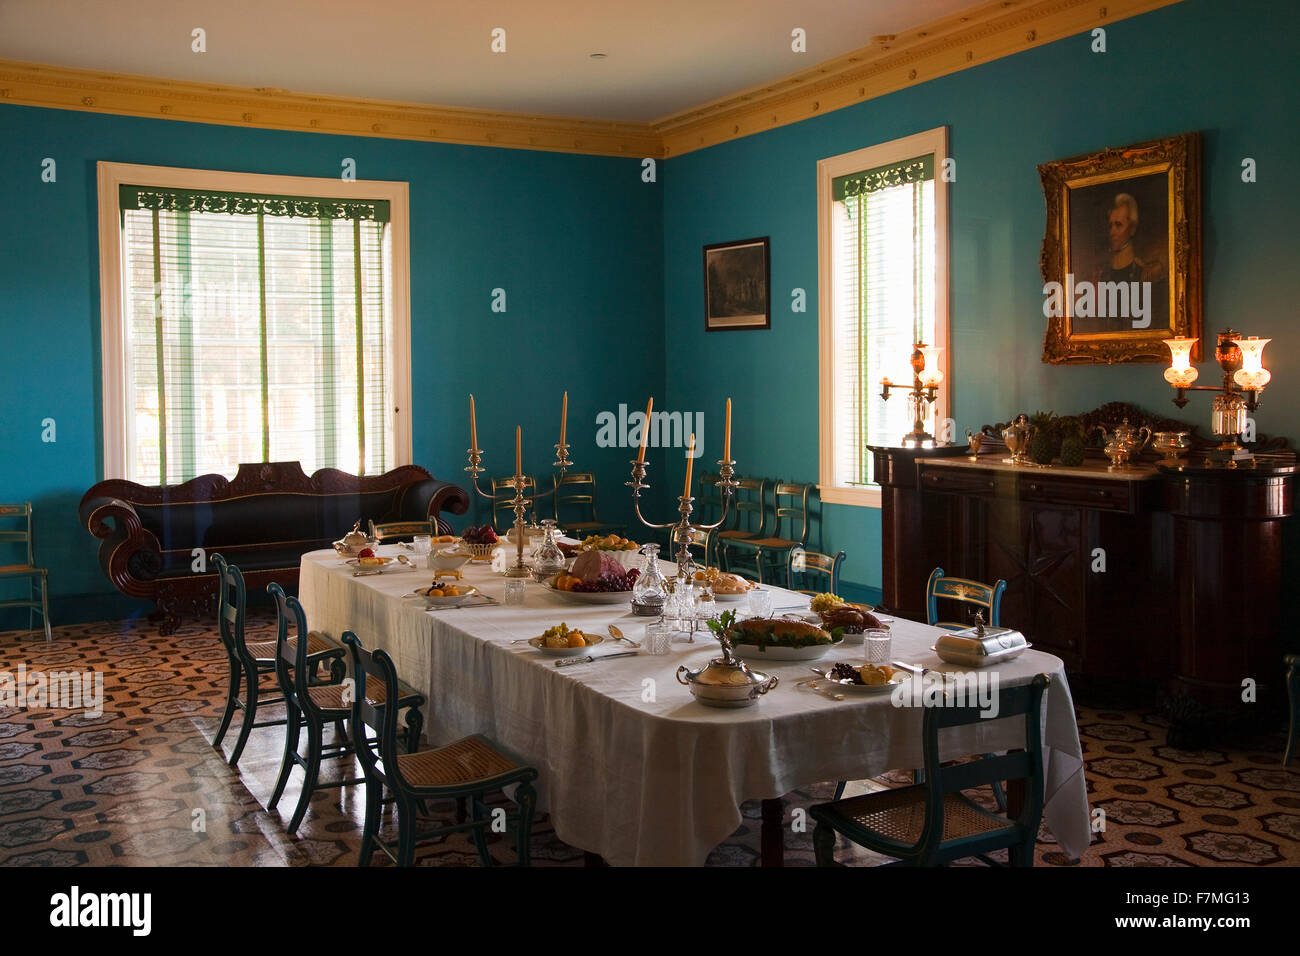 Interior view of Dining Room at The Hermitage, President Andrew Jackson Mansion and Home, Nashville, Davidson County, Tennessee, USA Stock Photo